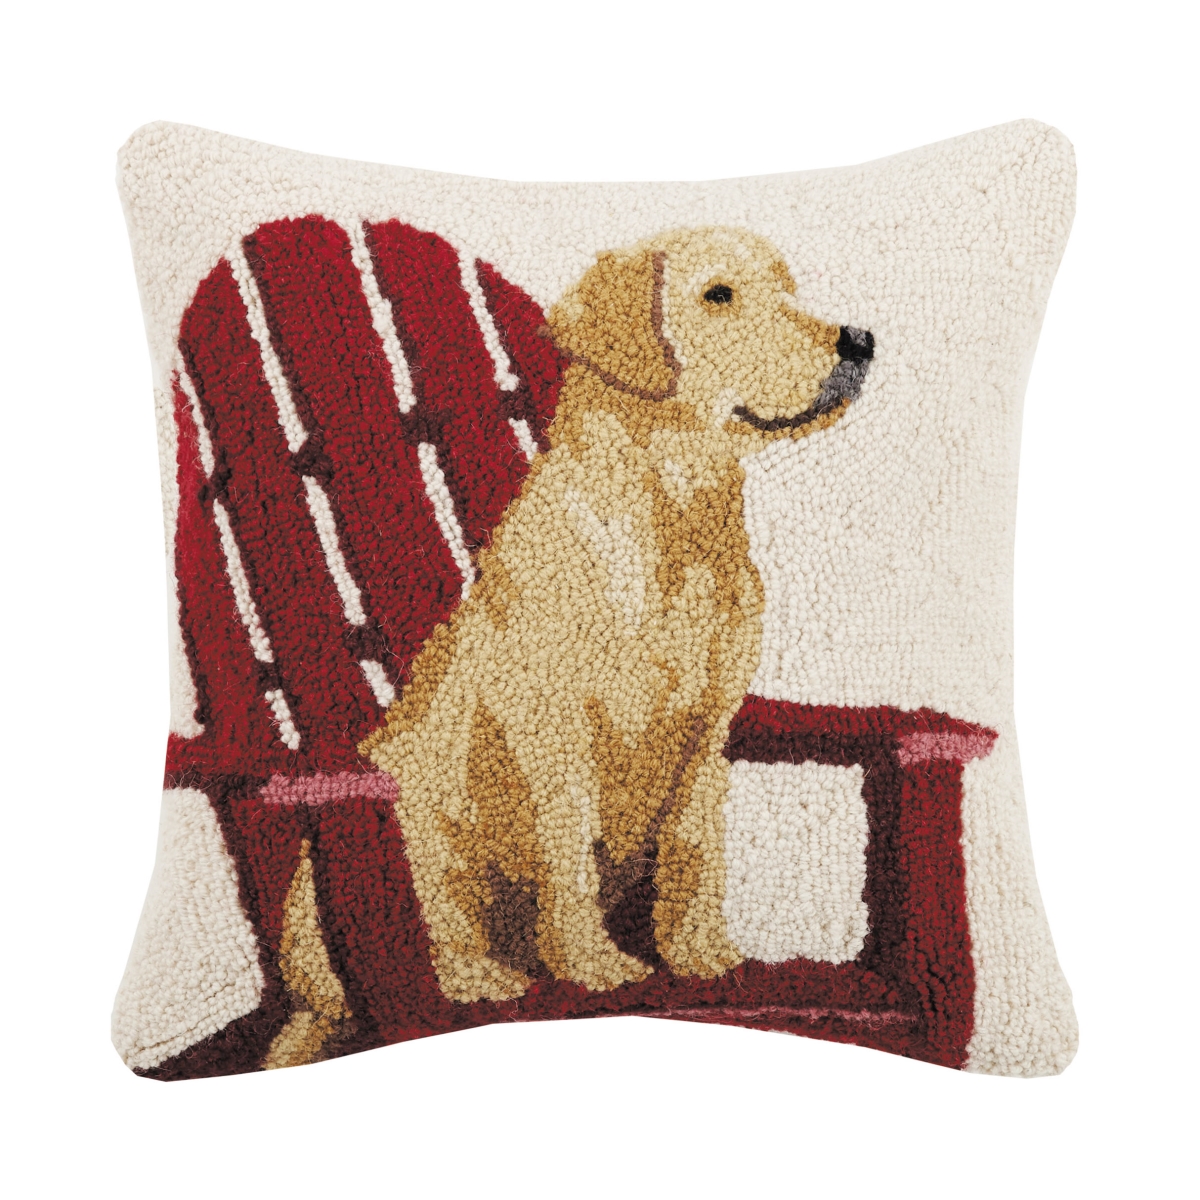 Picture of Peking Handicraft 30SJM9240C16SQ 16 x 16 in. Adirondack Poly Filled Hook Pillow with Retriever